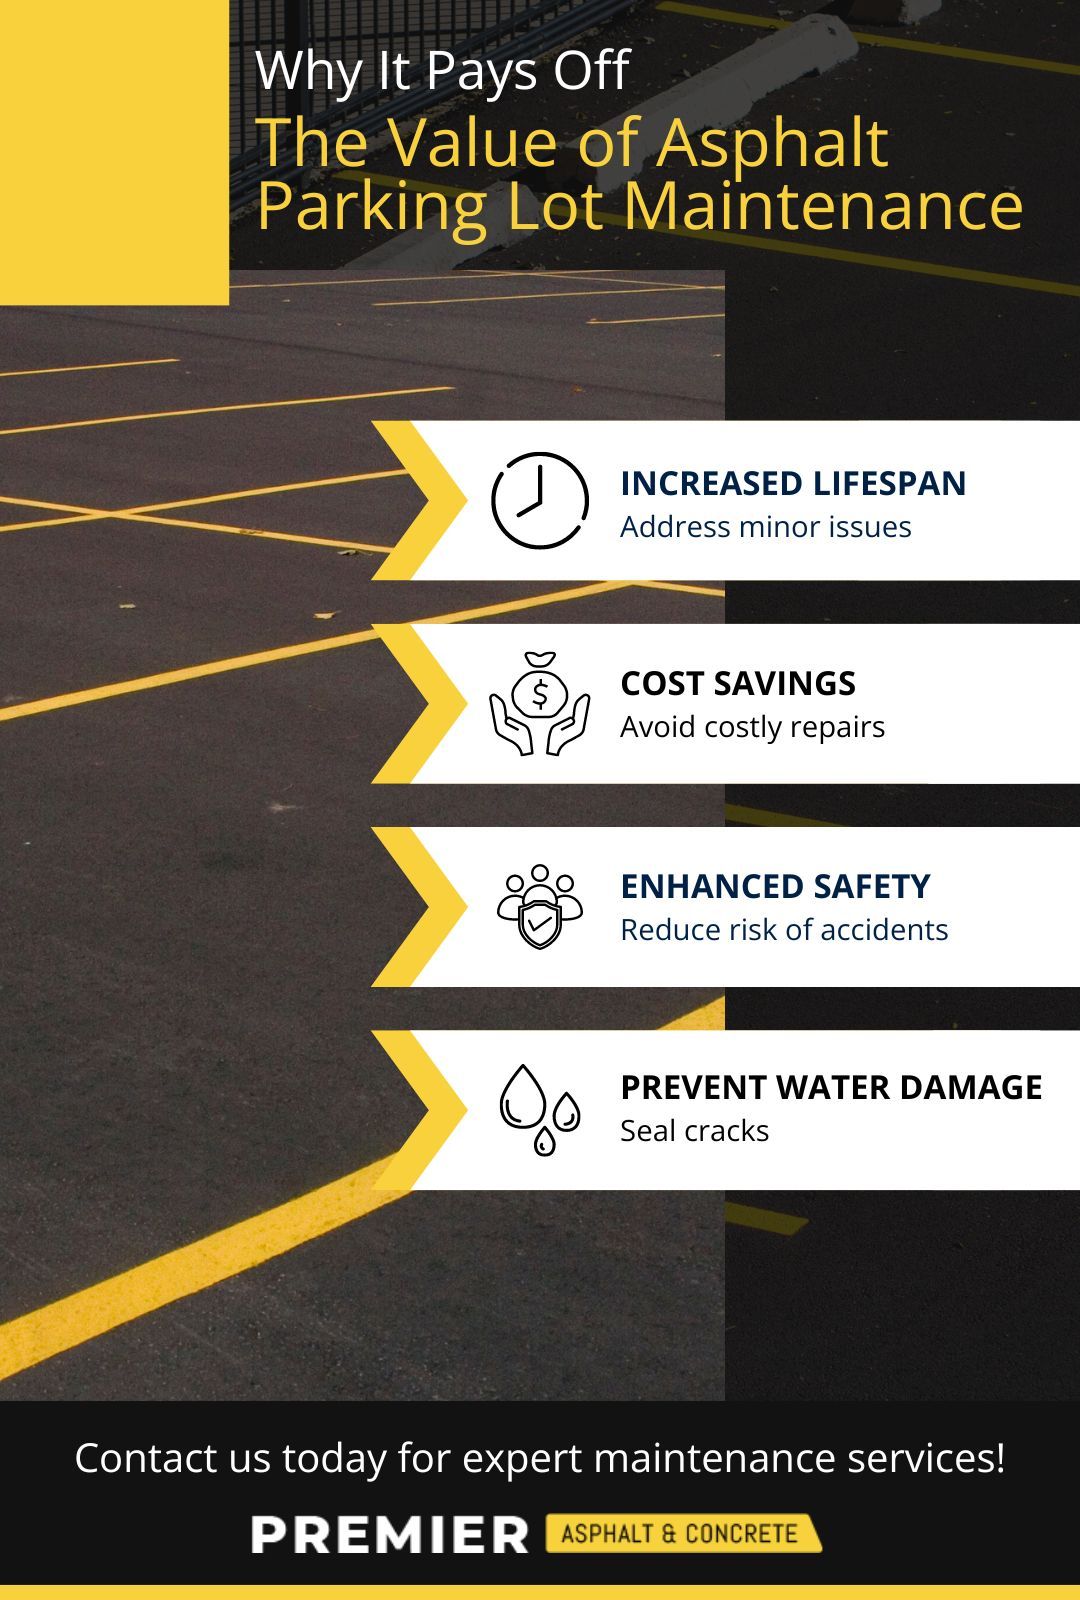 M25231 - Infographic - The Value of Asphalt Parking Lot Maintenance Why It Pays Off (1).jpg